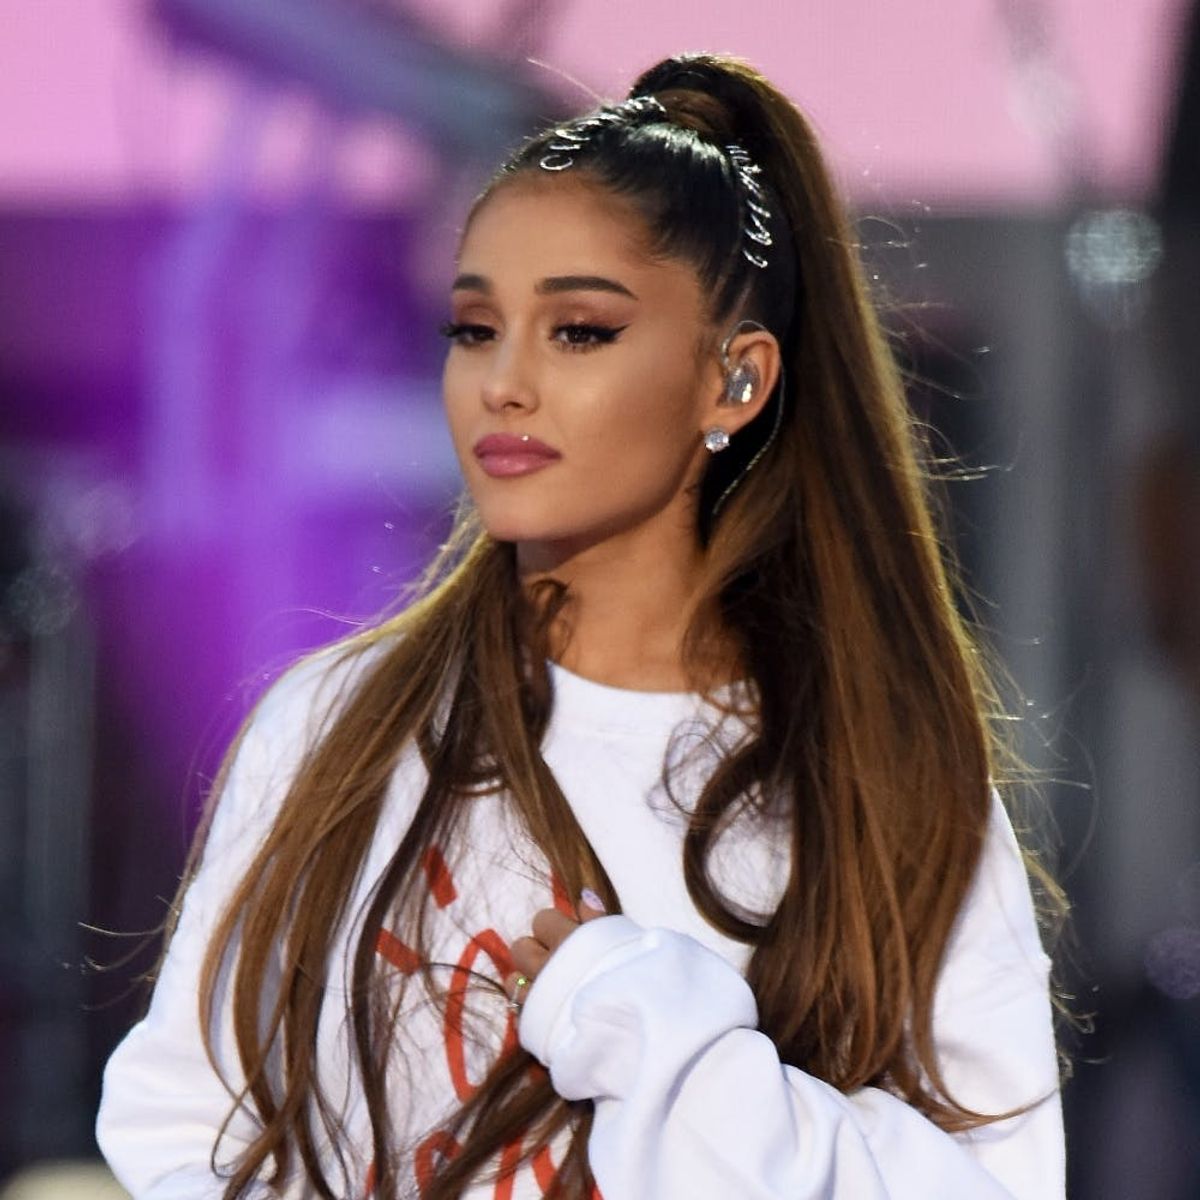 Ariana Grande Is Being Made an Honorary Citizen of Manchester